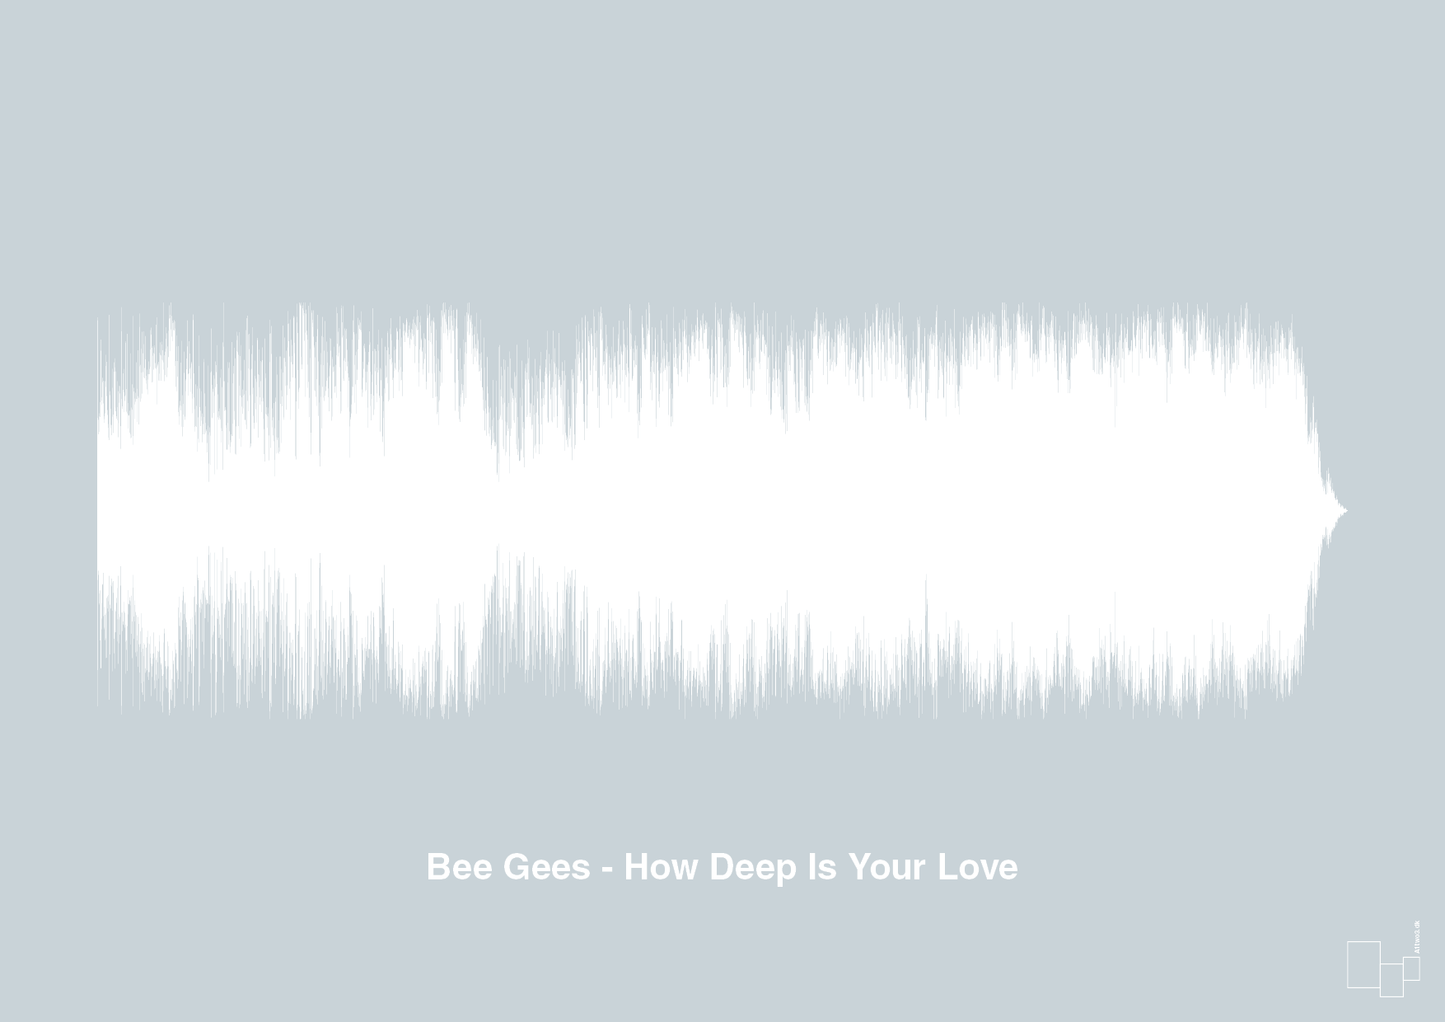 bee gees - how deep is your love - Plakat med Musik i Light Drizzle